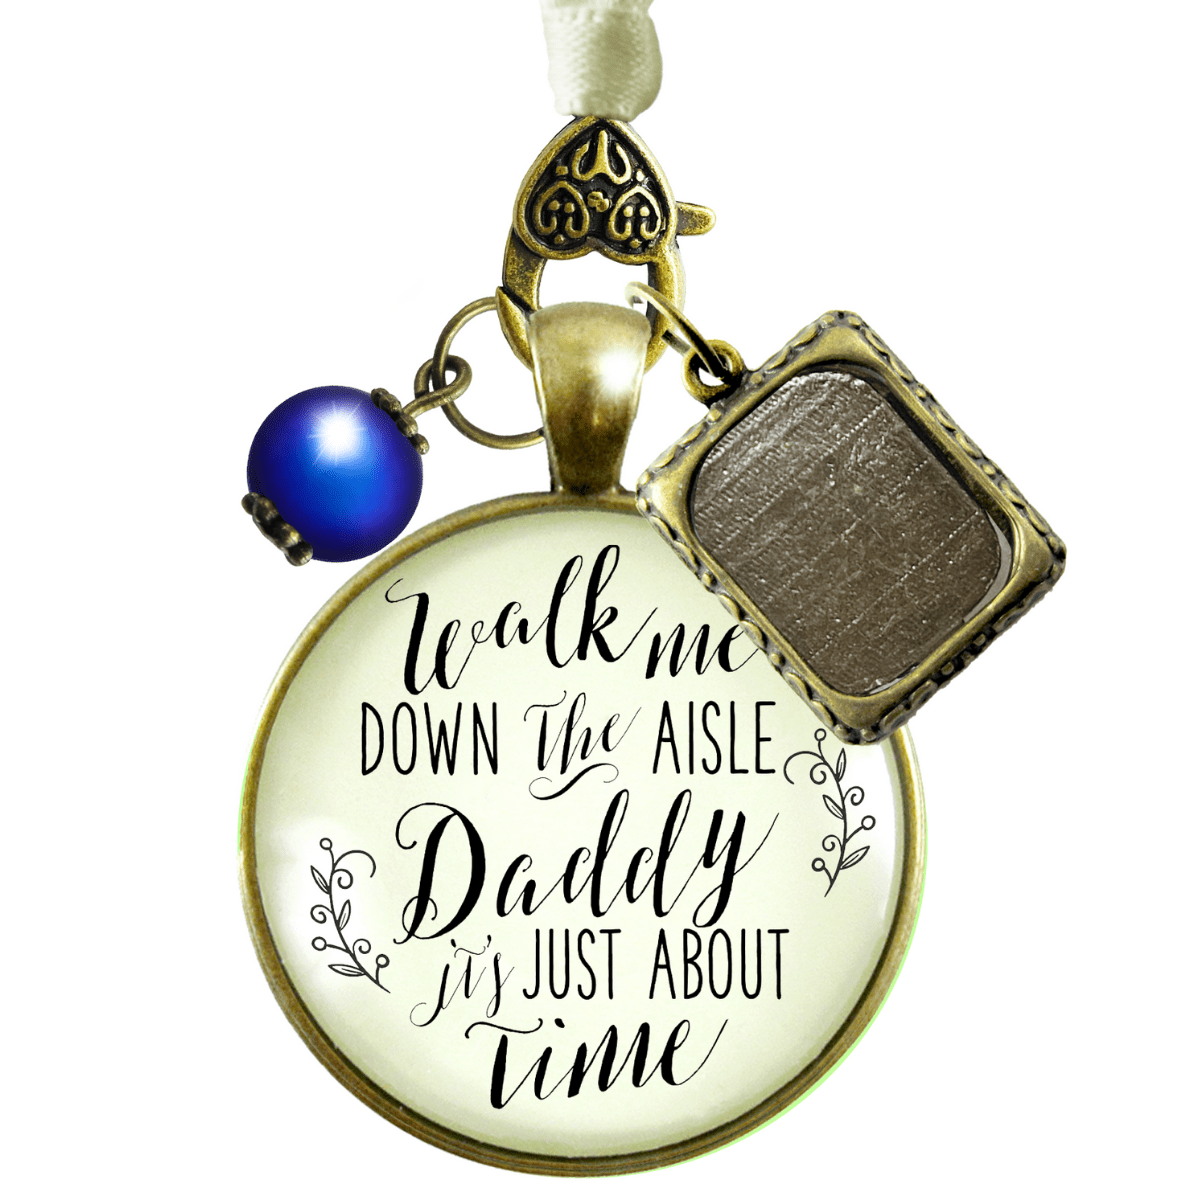 Walk Me Down The Aisle Daddy It's Just About Time - BRONZE - CREAM - BLUE BEAD